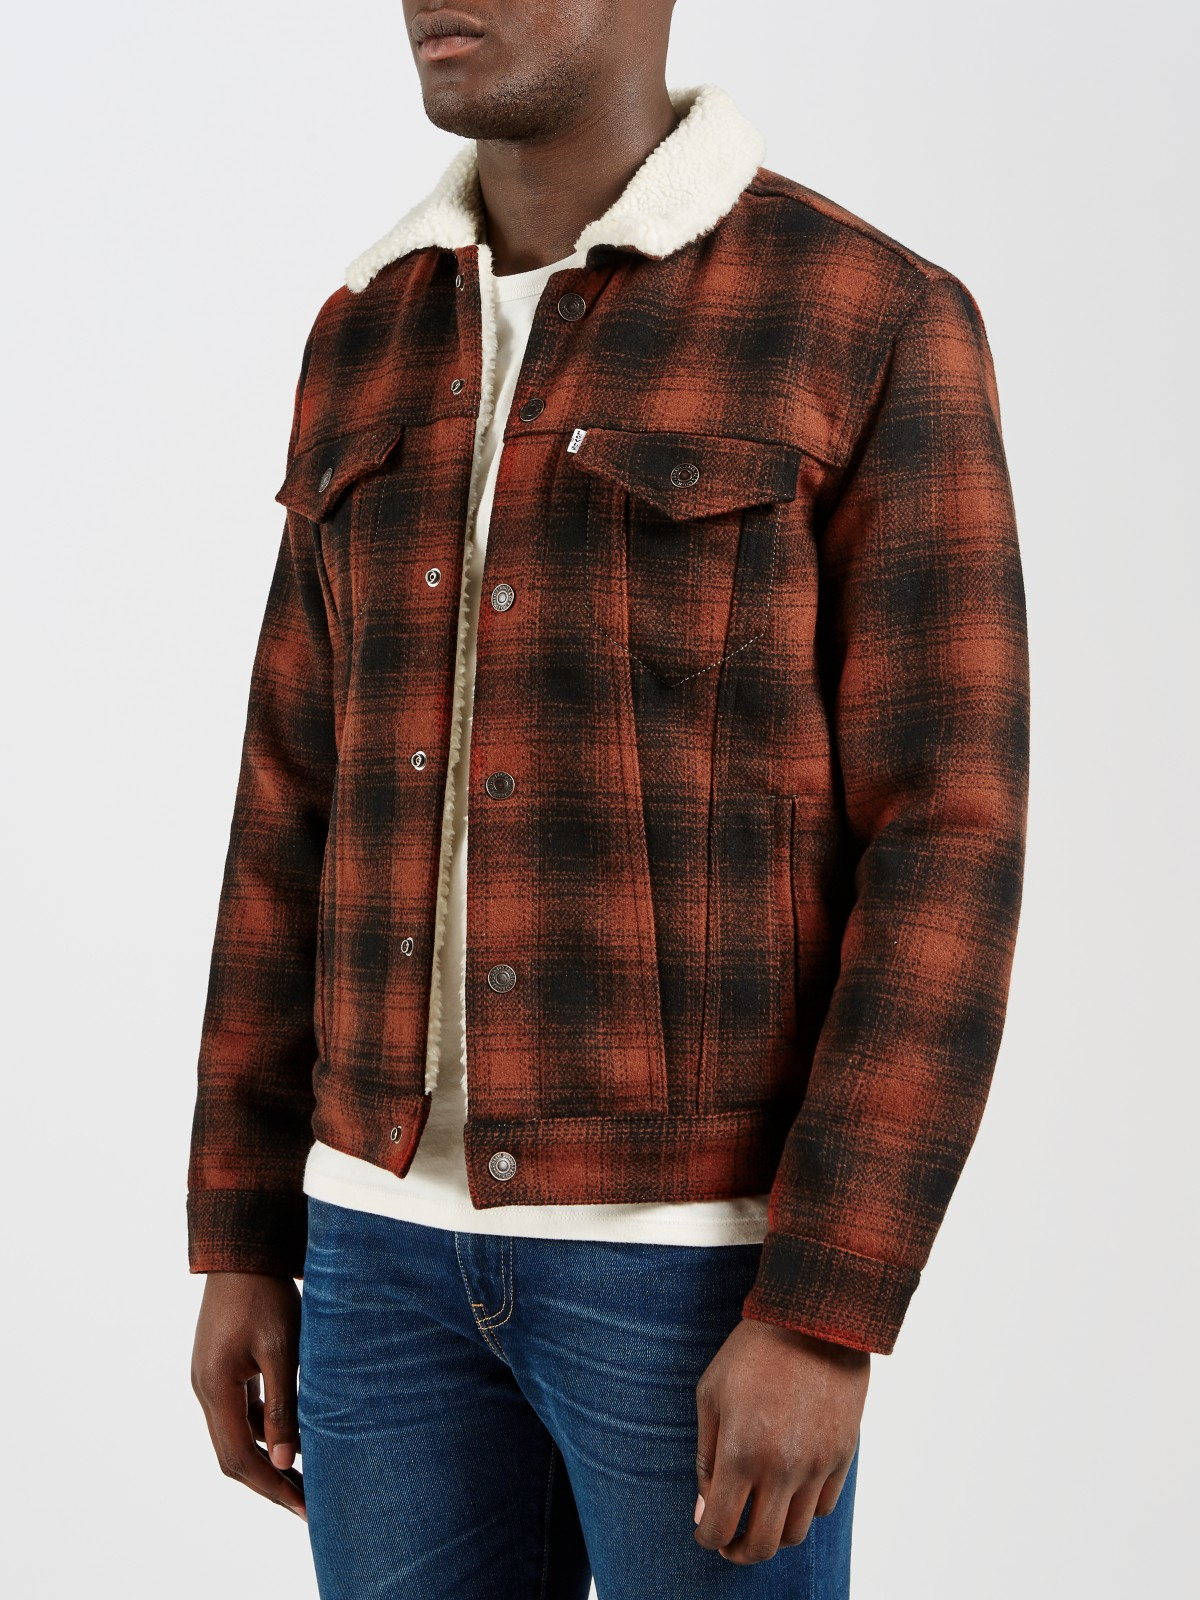 Levi'S Sherpa Check Jacket for Men - Lyst